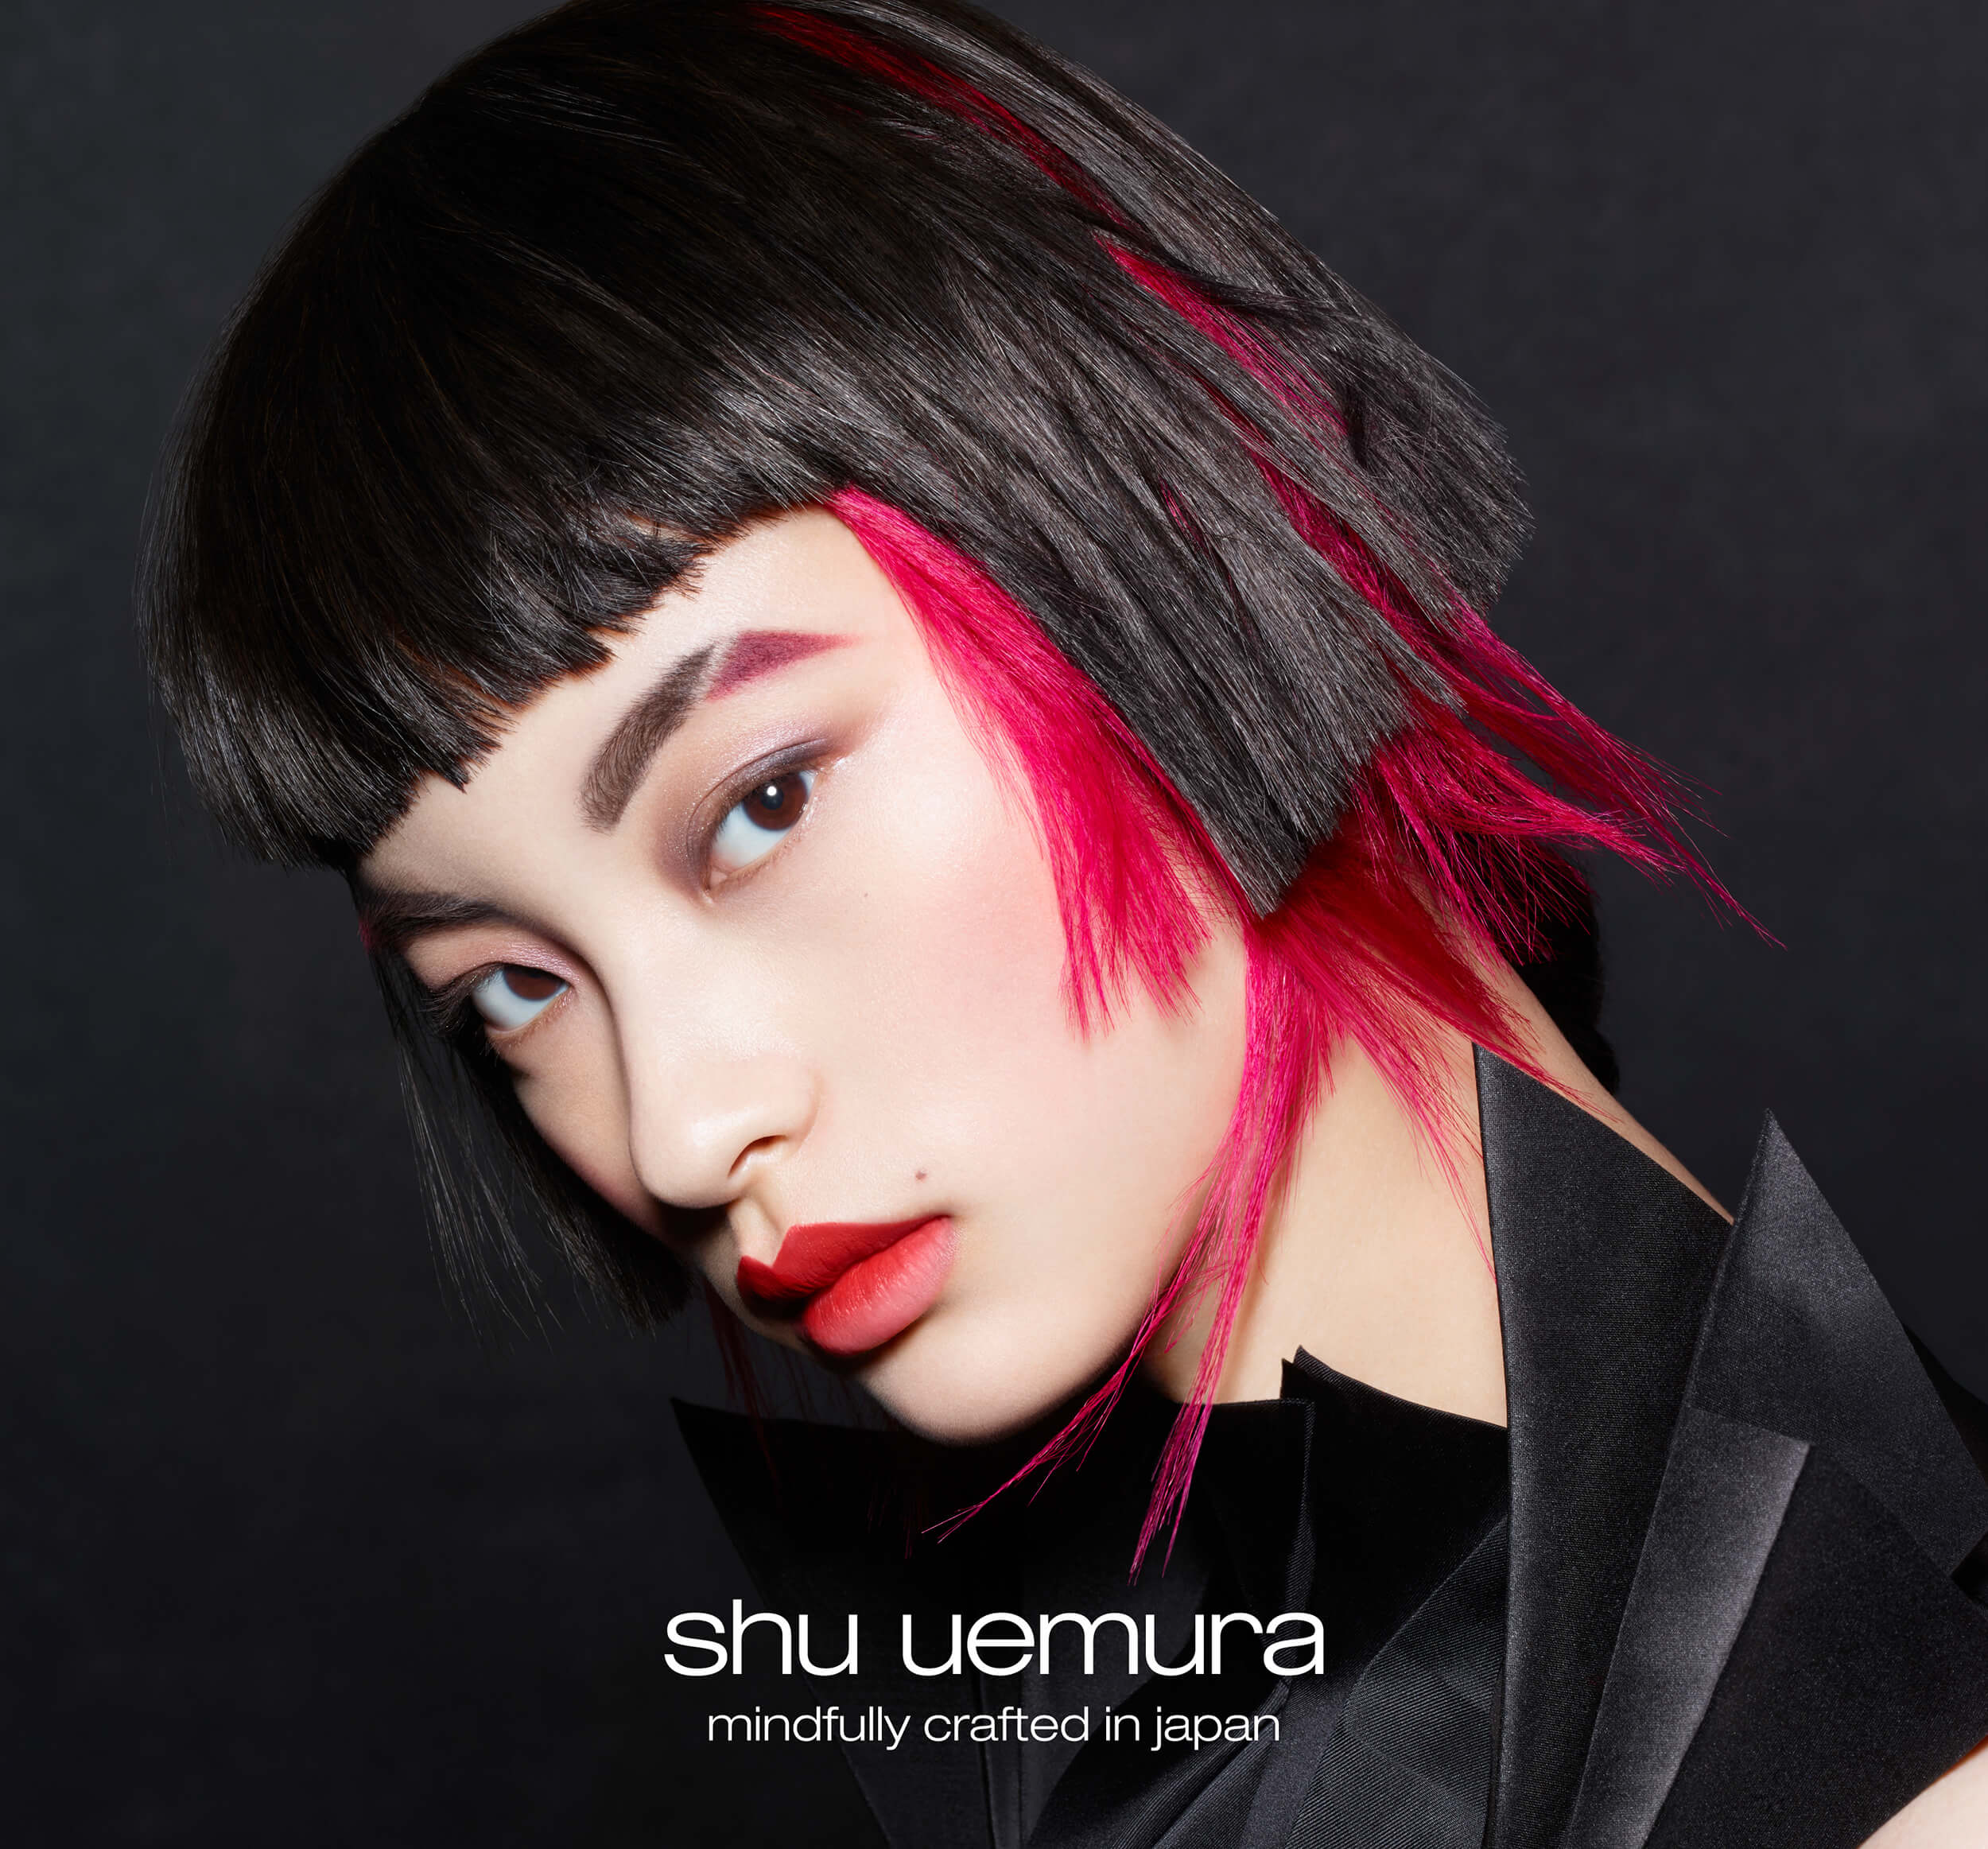 Shu Uemura Releases Sustainable 'Mindfully Crafted in Japan' Collection, MOSHI MOSHI NIPPON